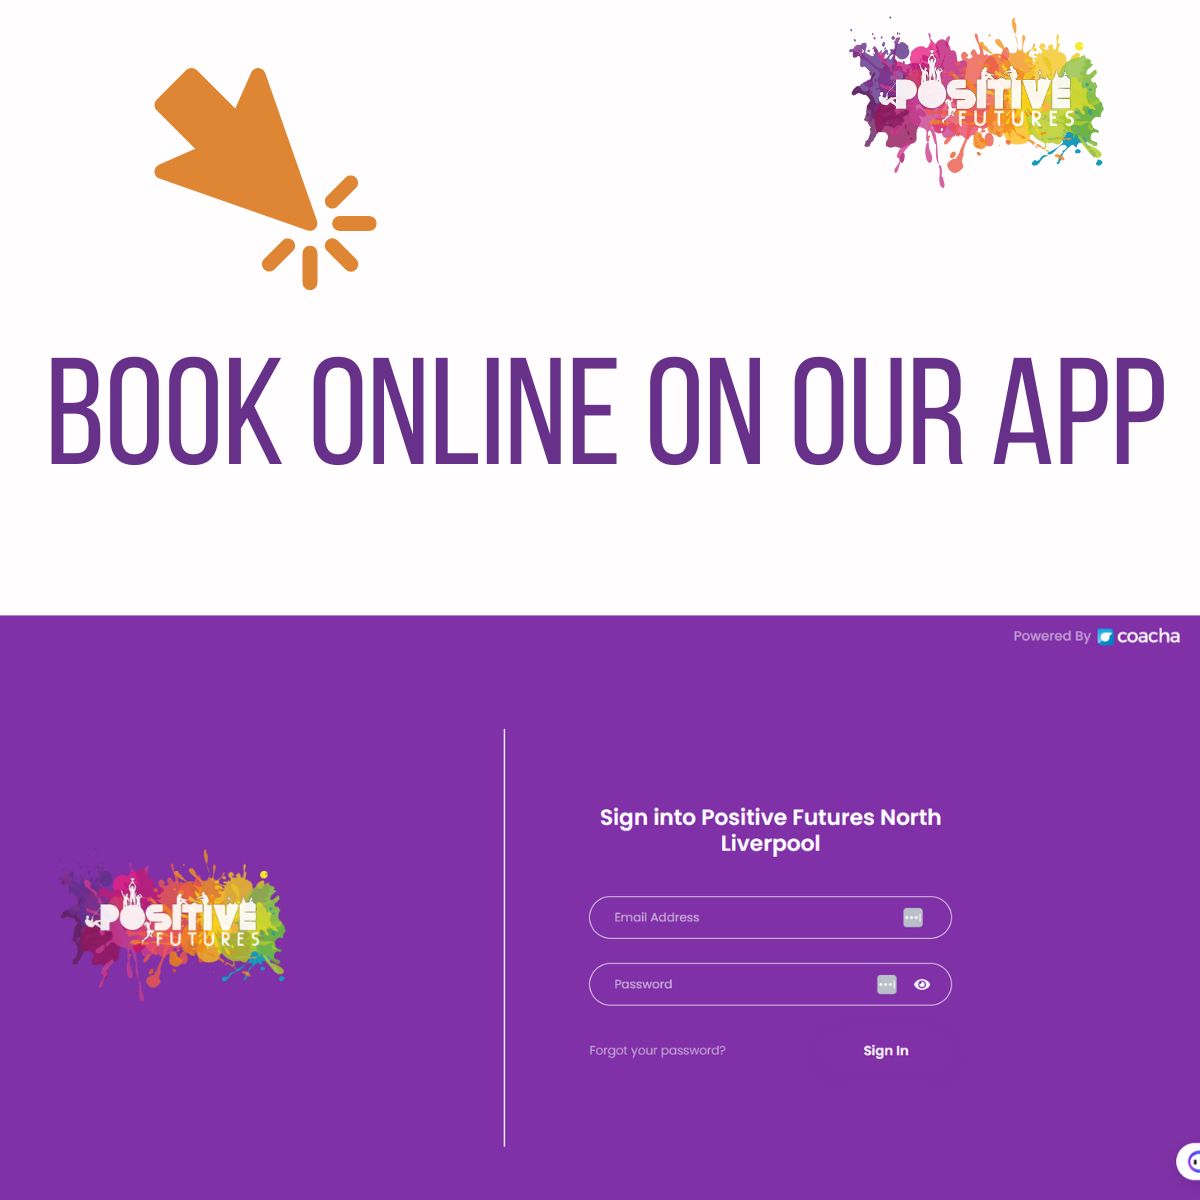 Did you know you can book onto our activities online now? All our activities are available to book online at the touch of a button on our new Coacha App. Book now! i.mtr.cool/pfmqffdkdk Any problems, contact one of the team.